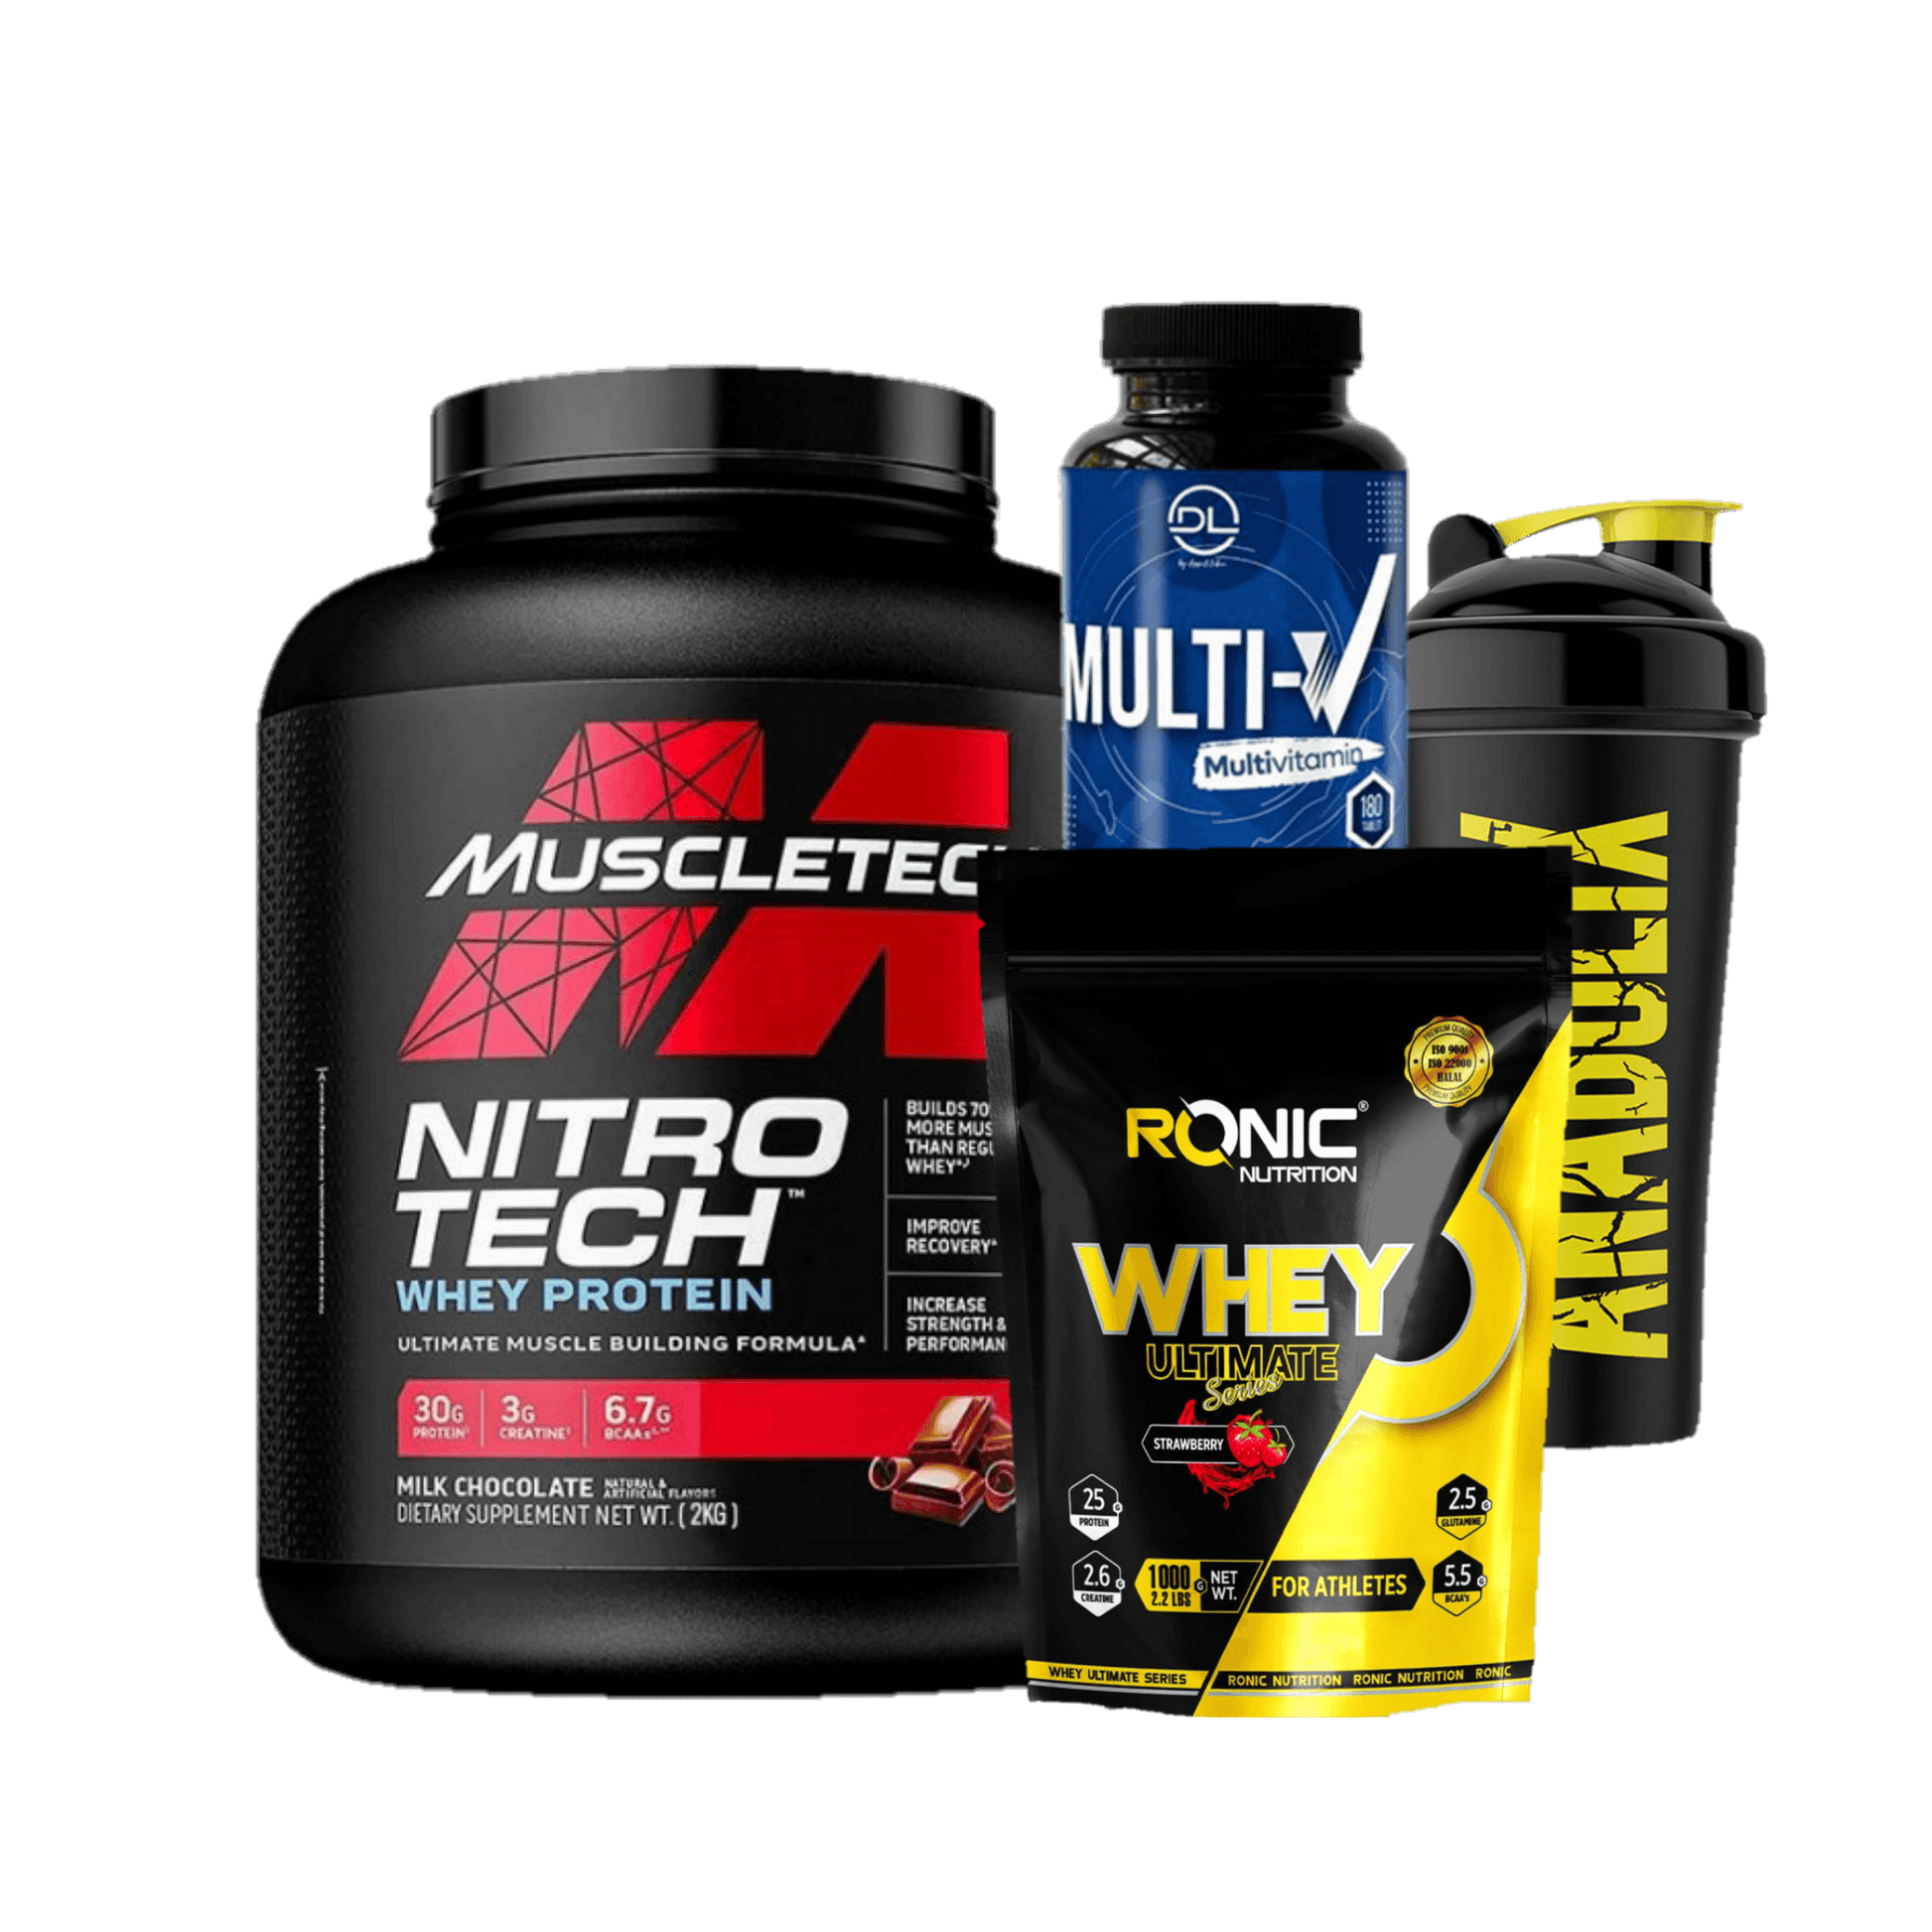 Nitrotech + Ronic Whey + Multi Vitamins + Shaker - The Supplements Factory